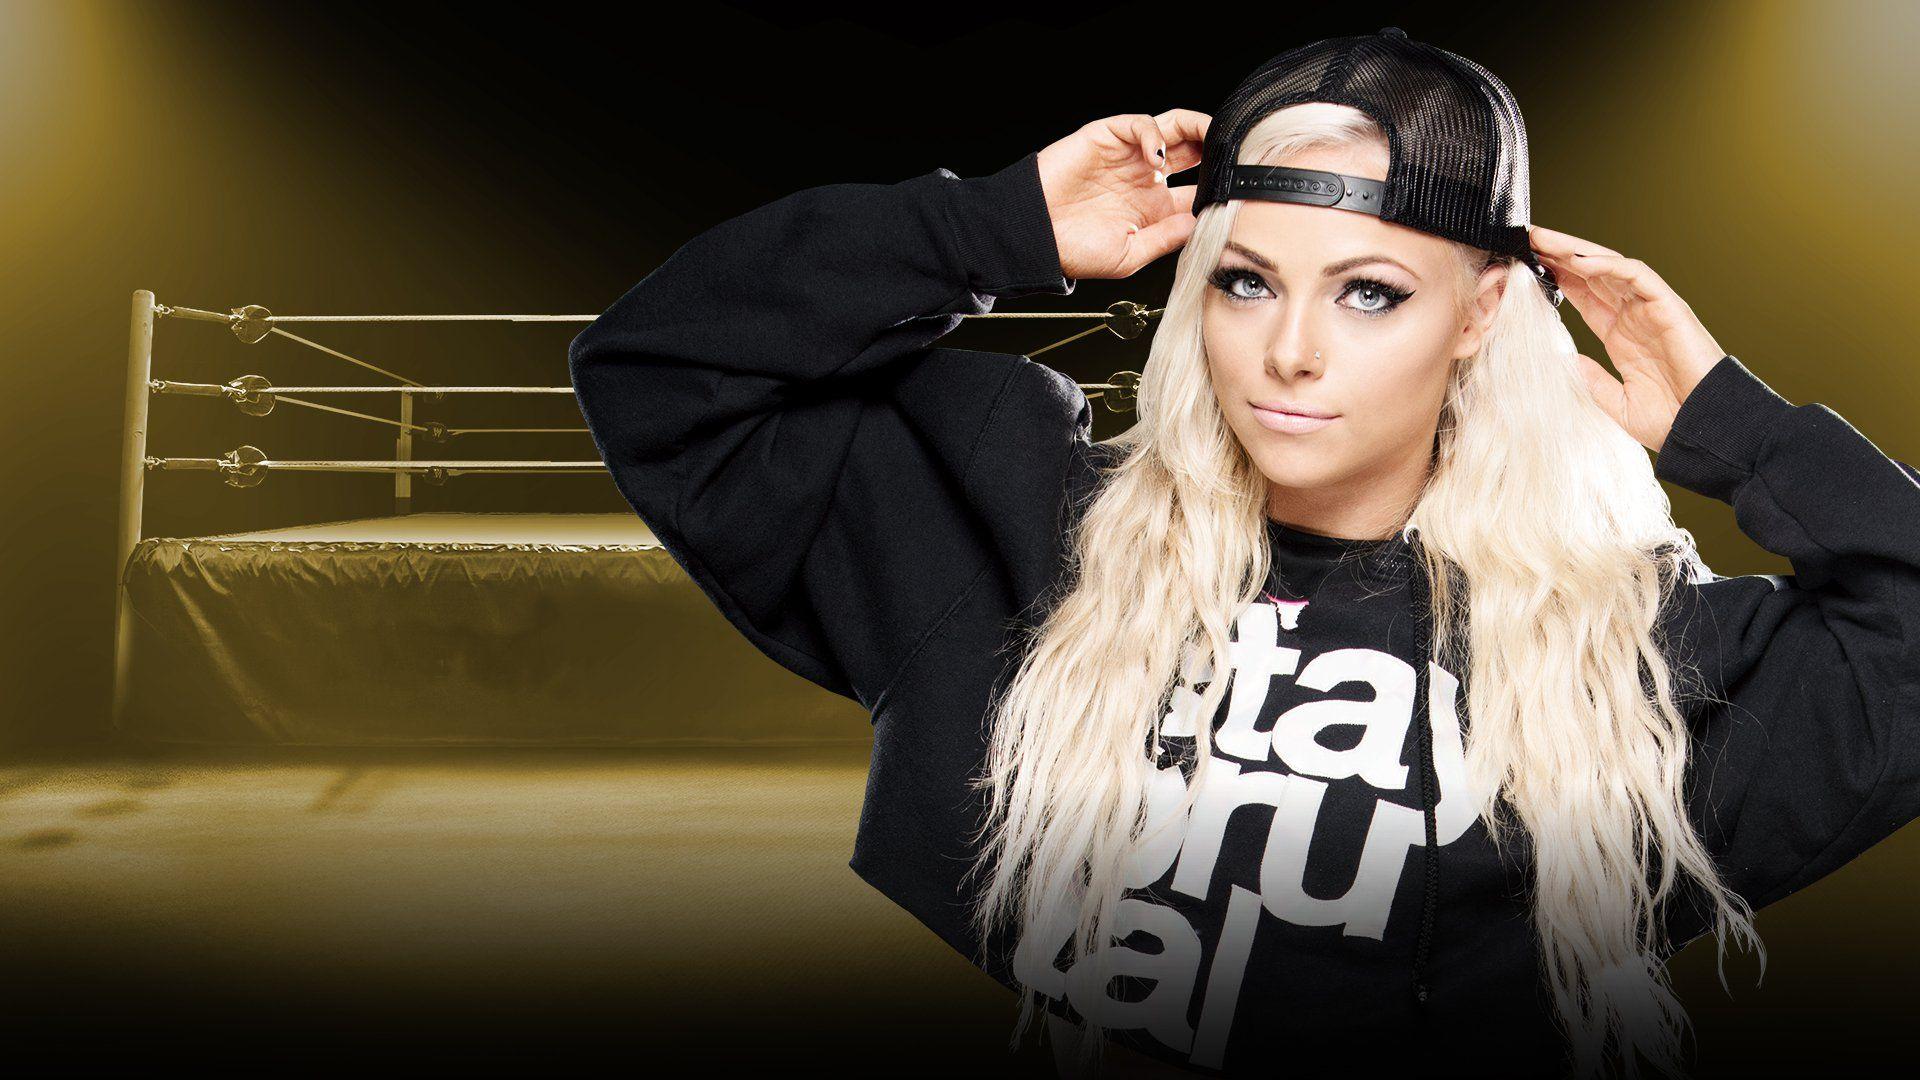 Undeterred: Liv Morgan vows to make it to the top of NXT